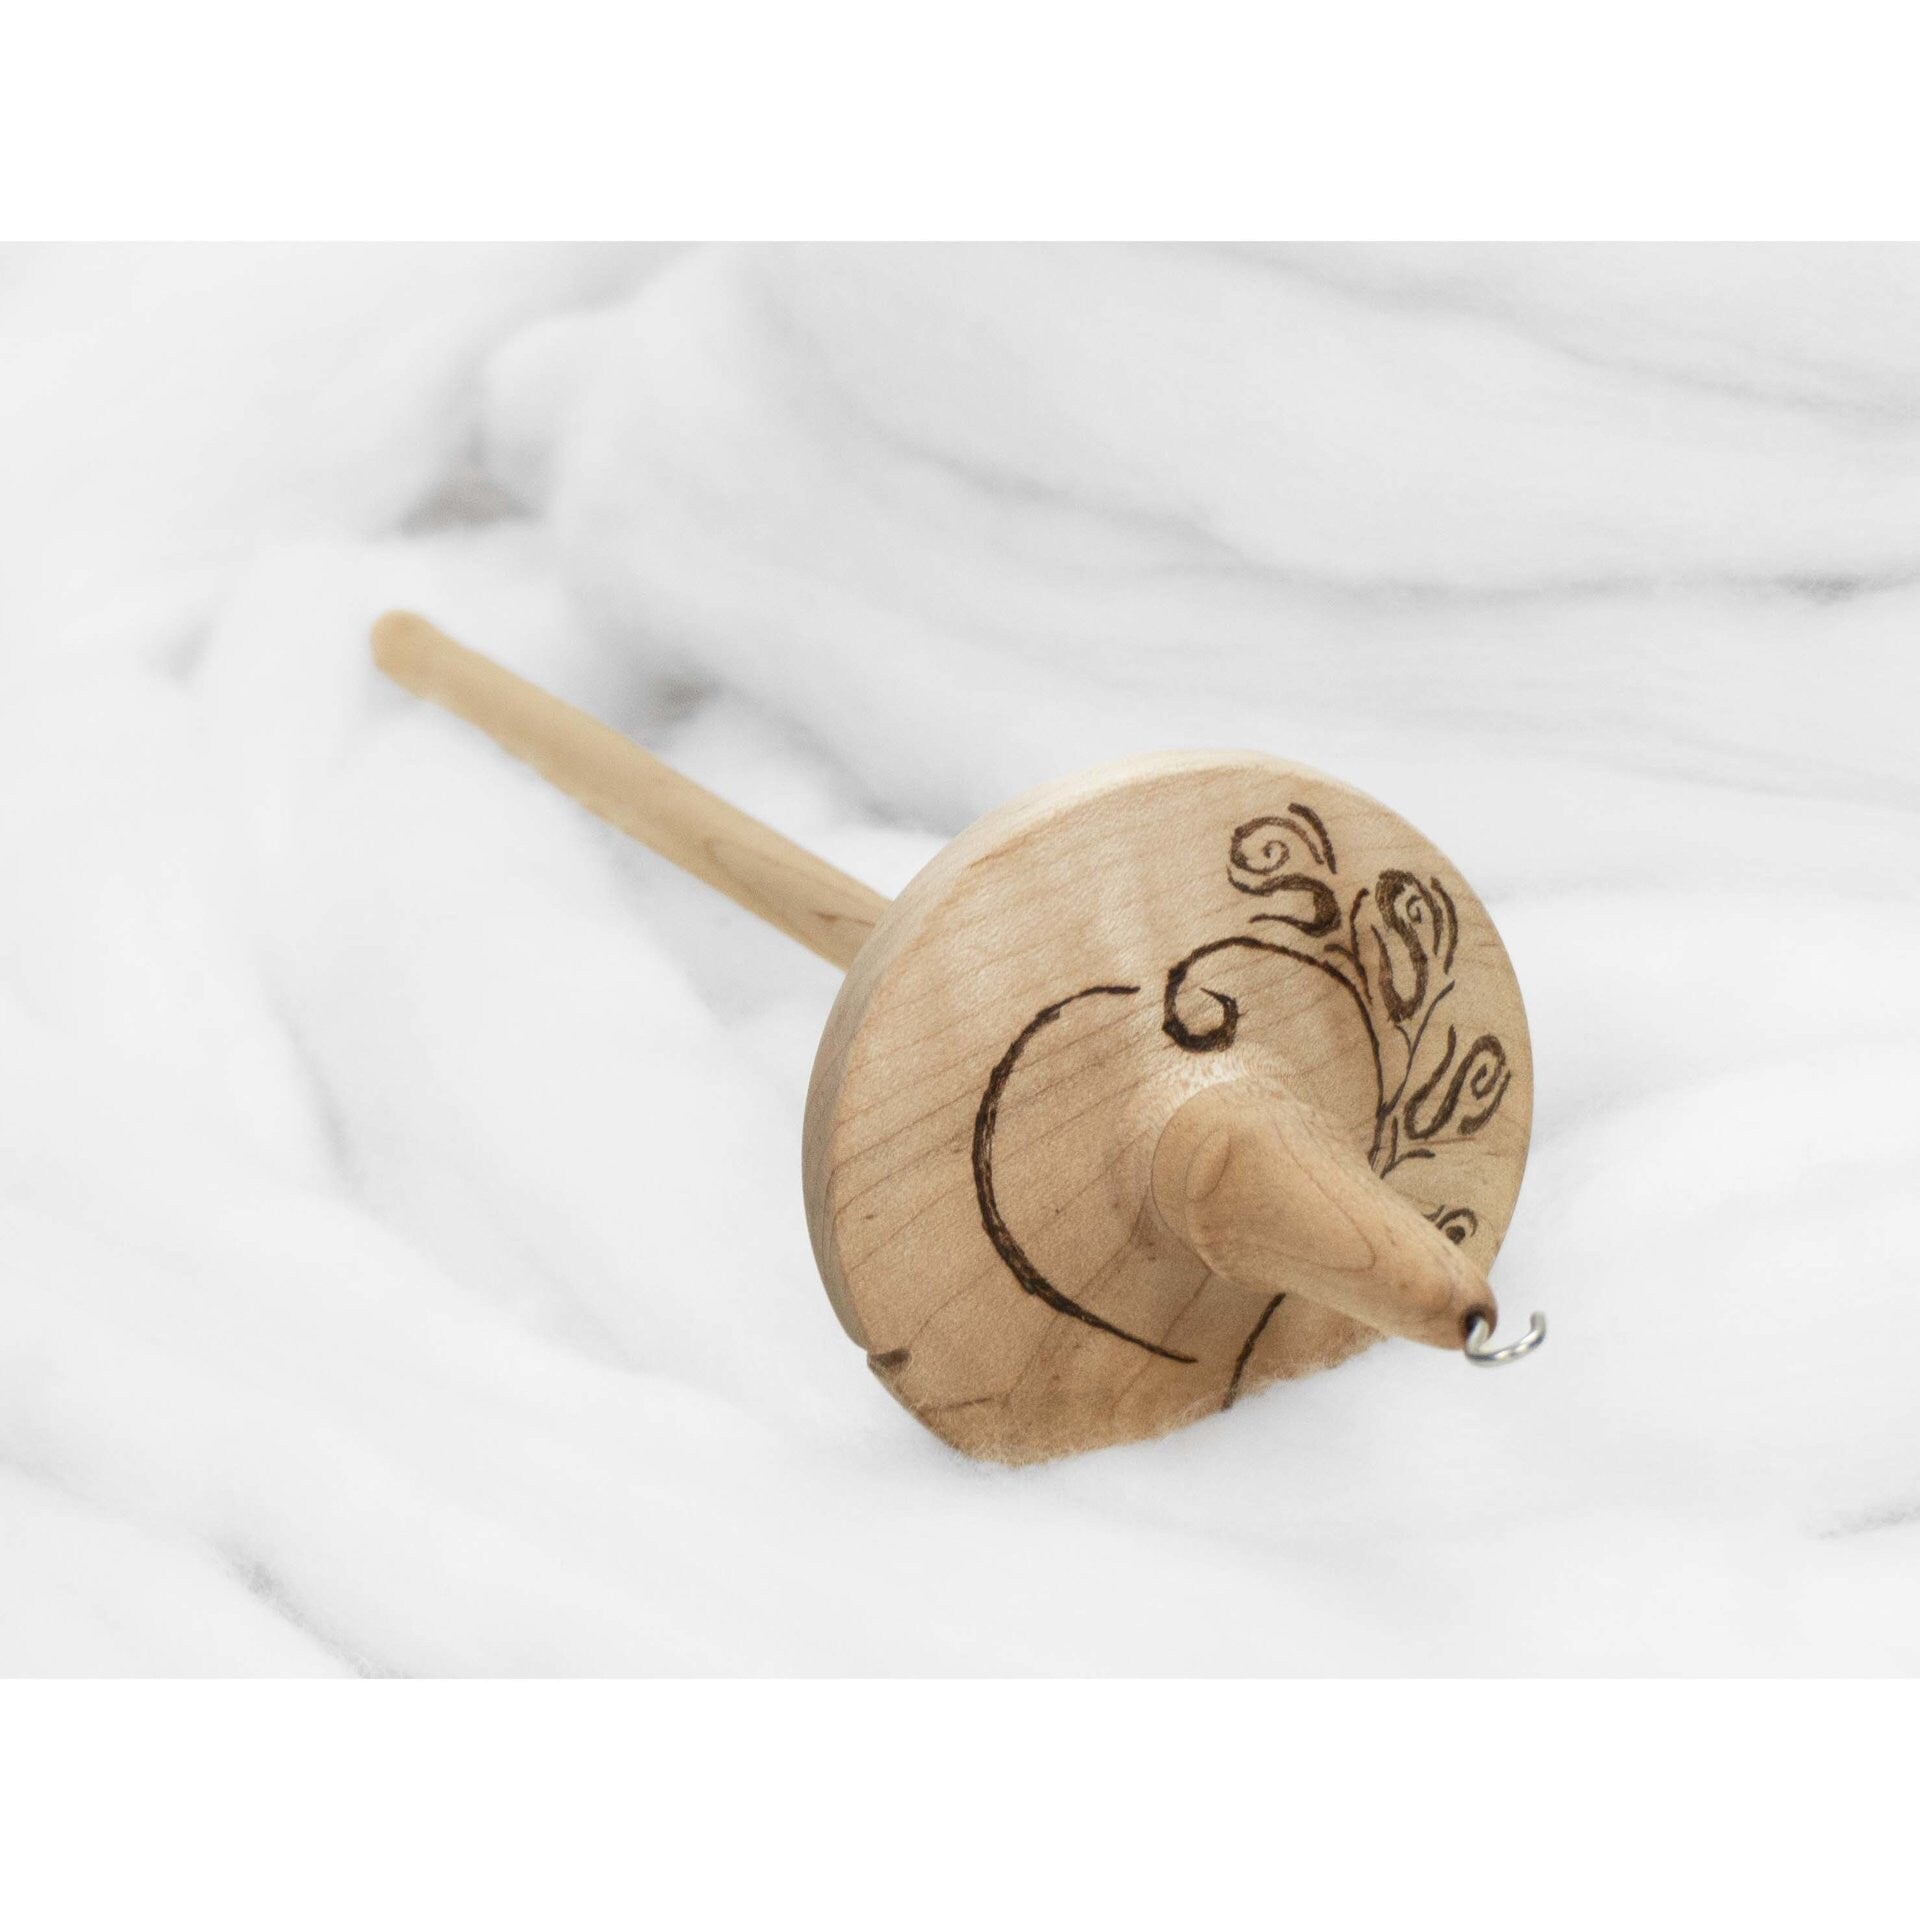 Twig size Top Whorl Spindle number 229 – Cynthia Wood Spinner